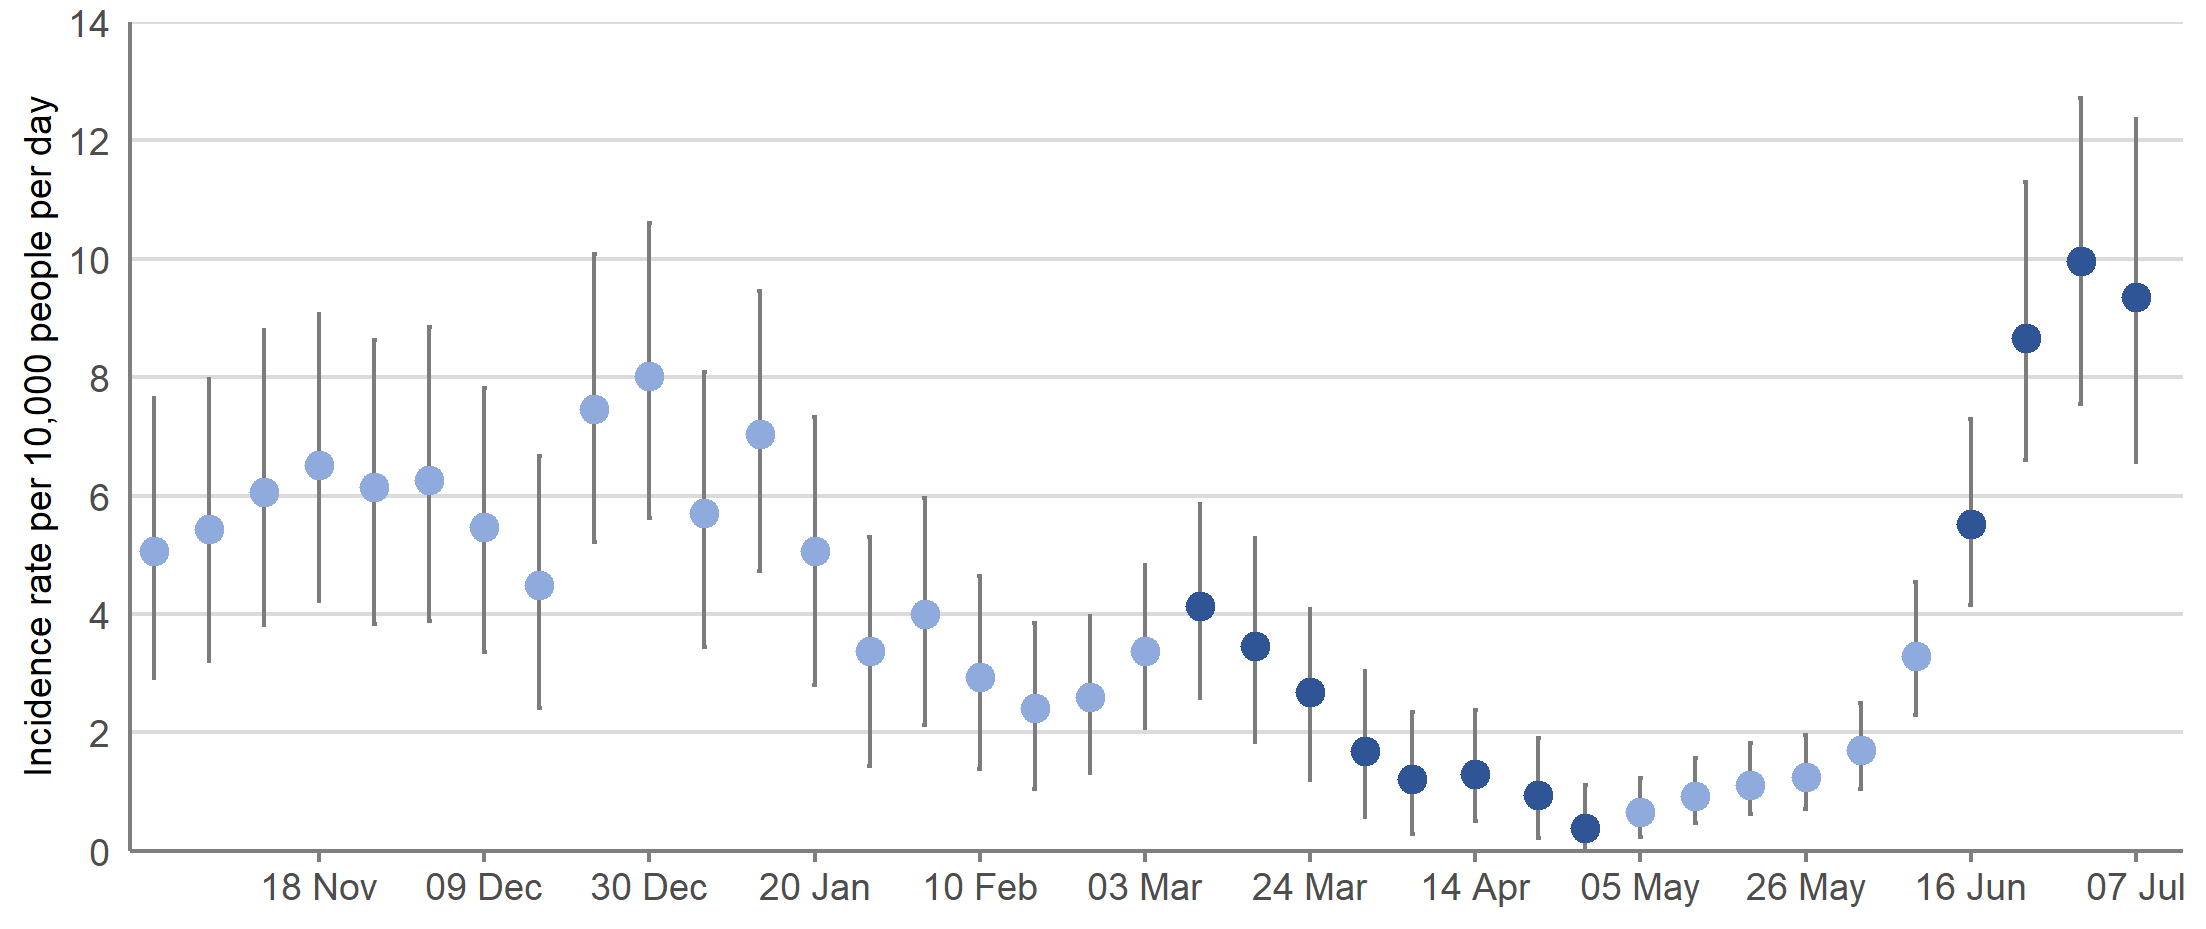 Figure 7: Official reported/indicative estimates of incidence rates in Scotland between 25 October 2020 and 7 July 2021, including 95% credible intervals (see notes 4,5,6)